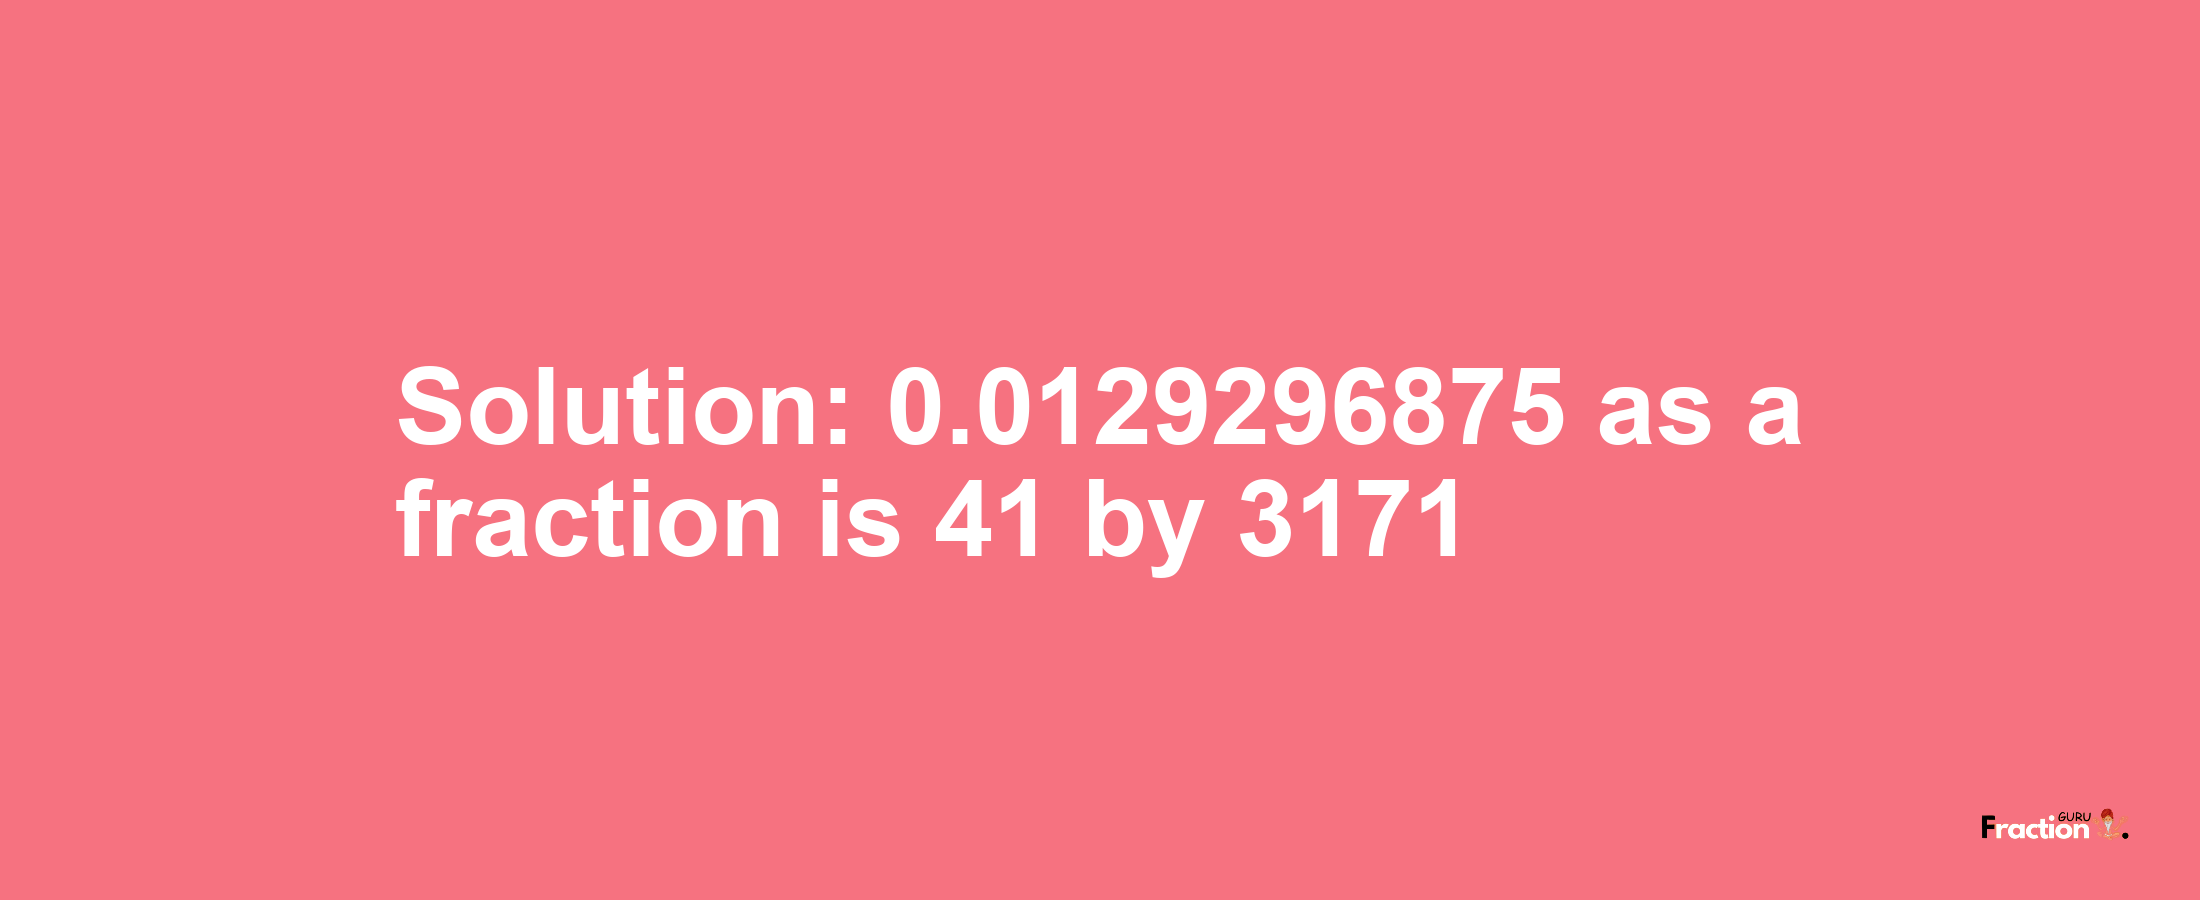 Solution:0.0129296875 as a fraction is 41/3171